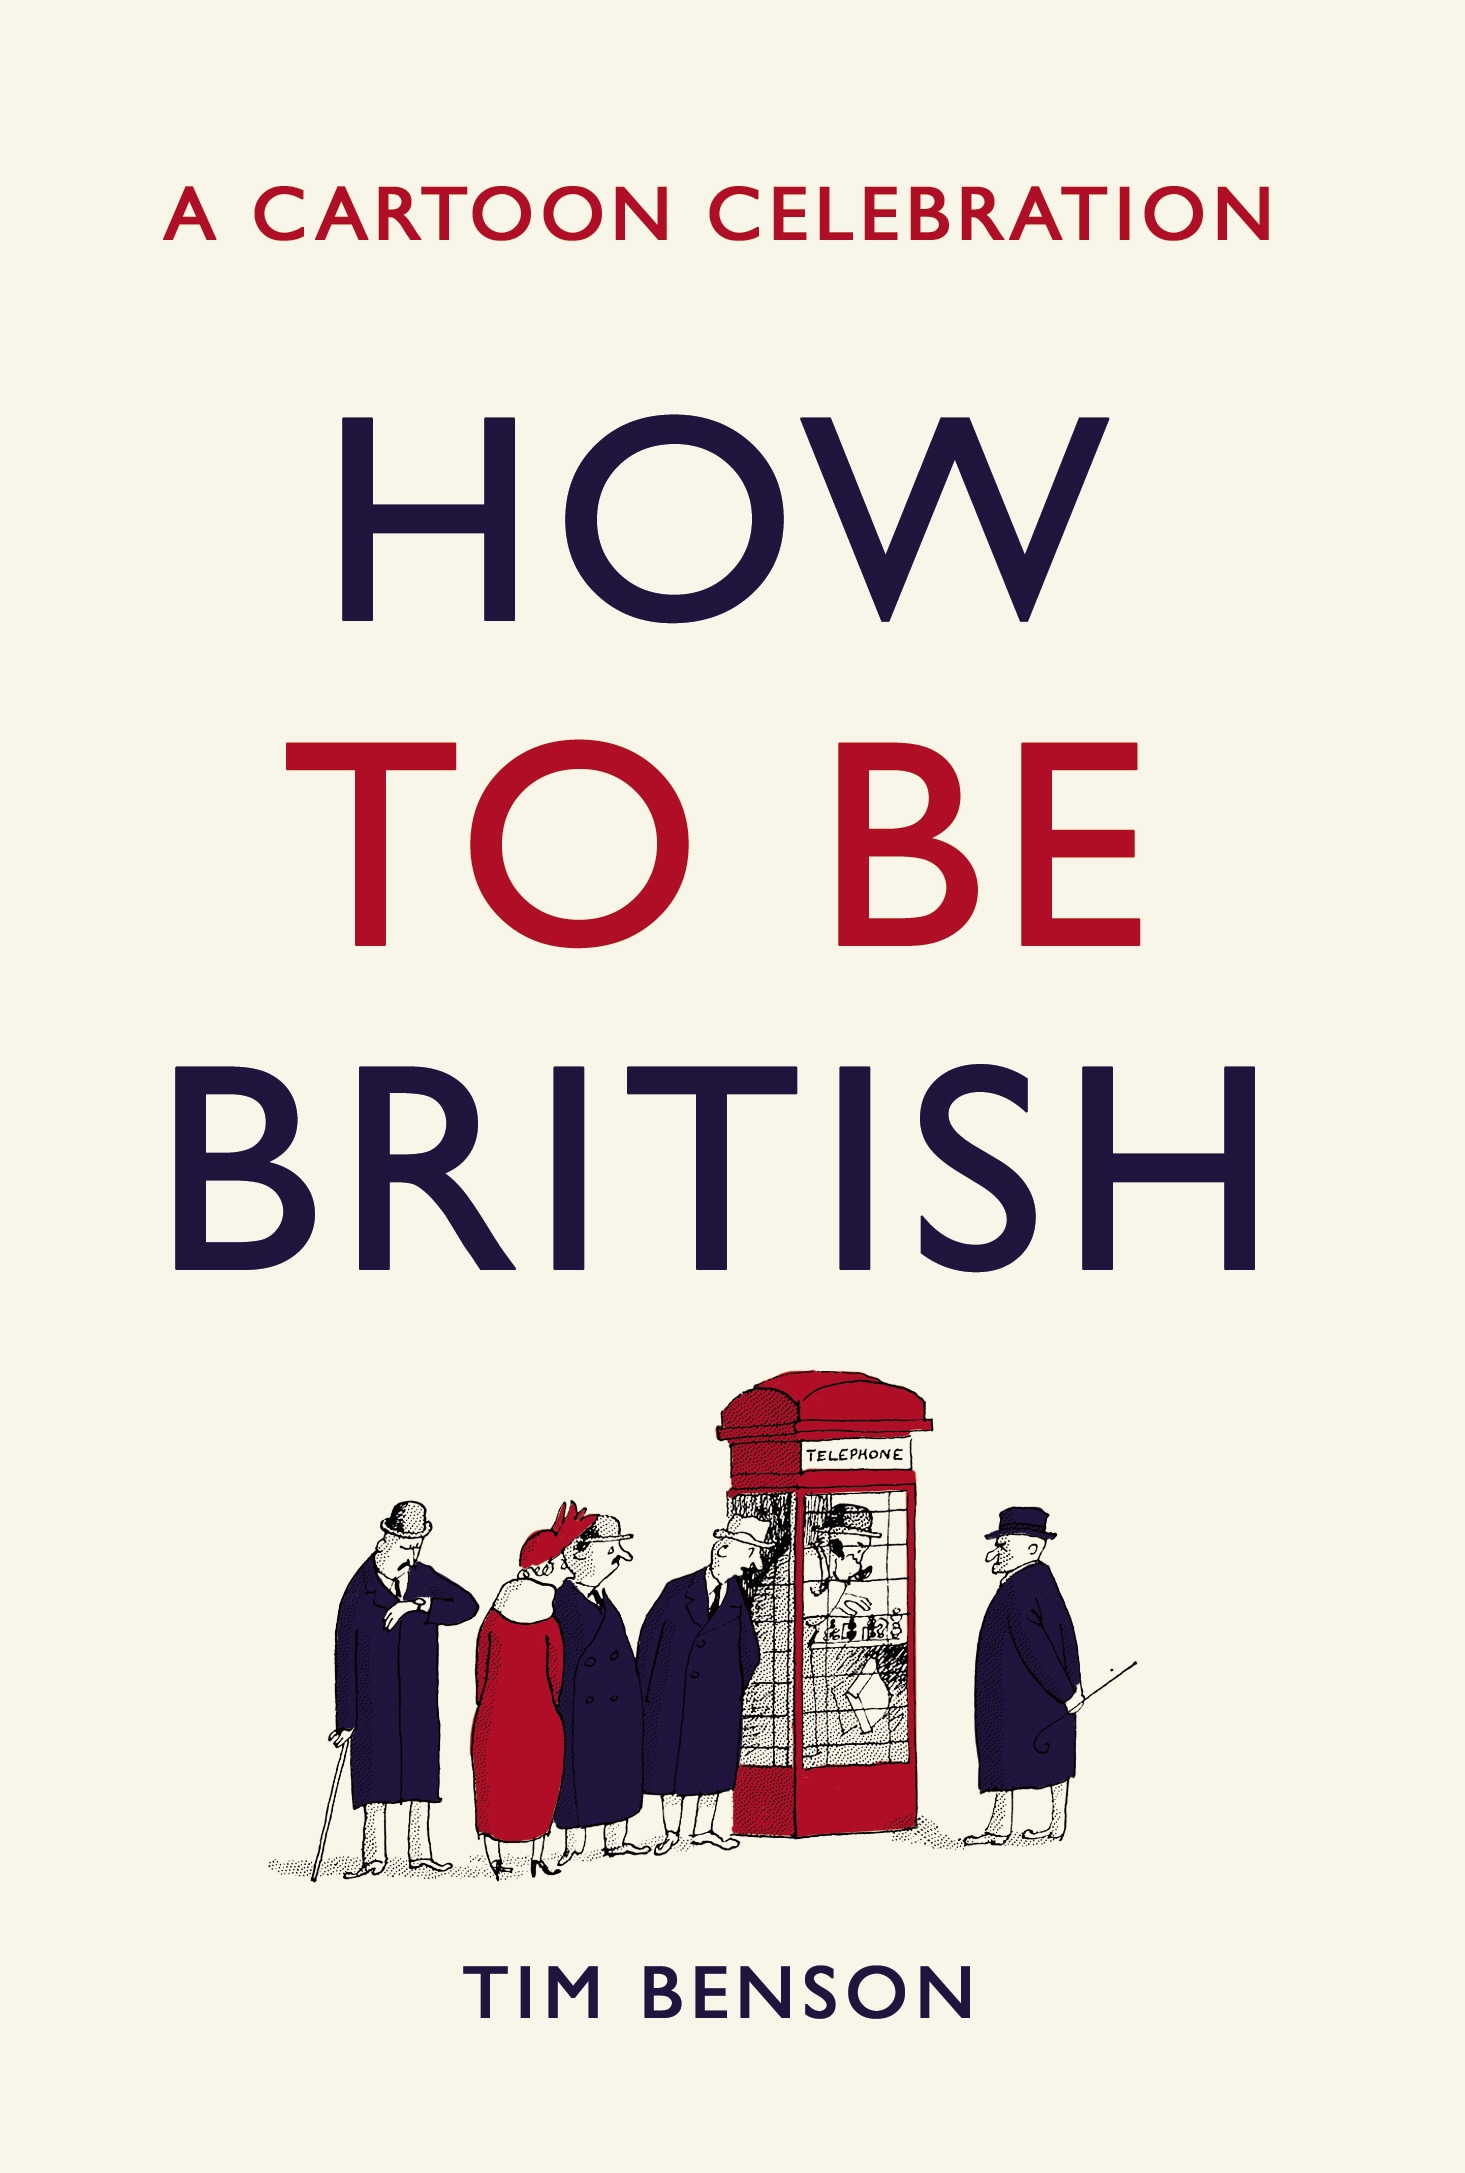 Book “How to be British” by Tim Benson — October 24, 2019